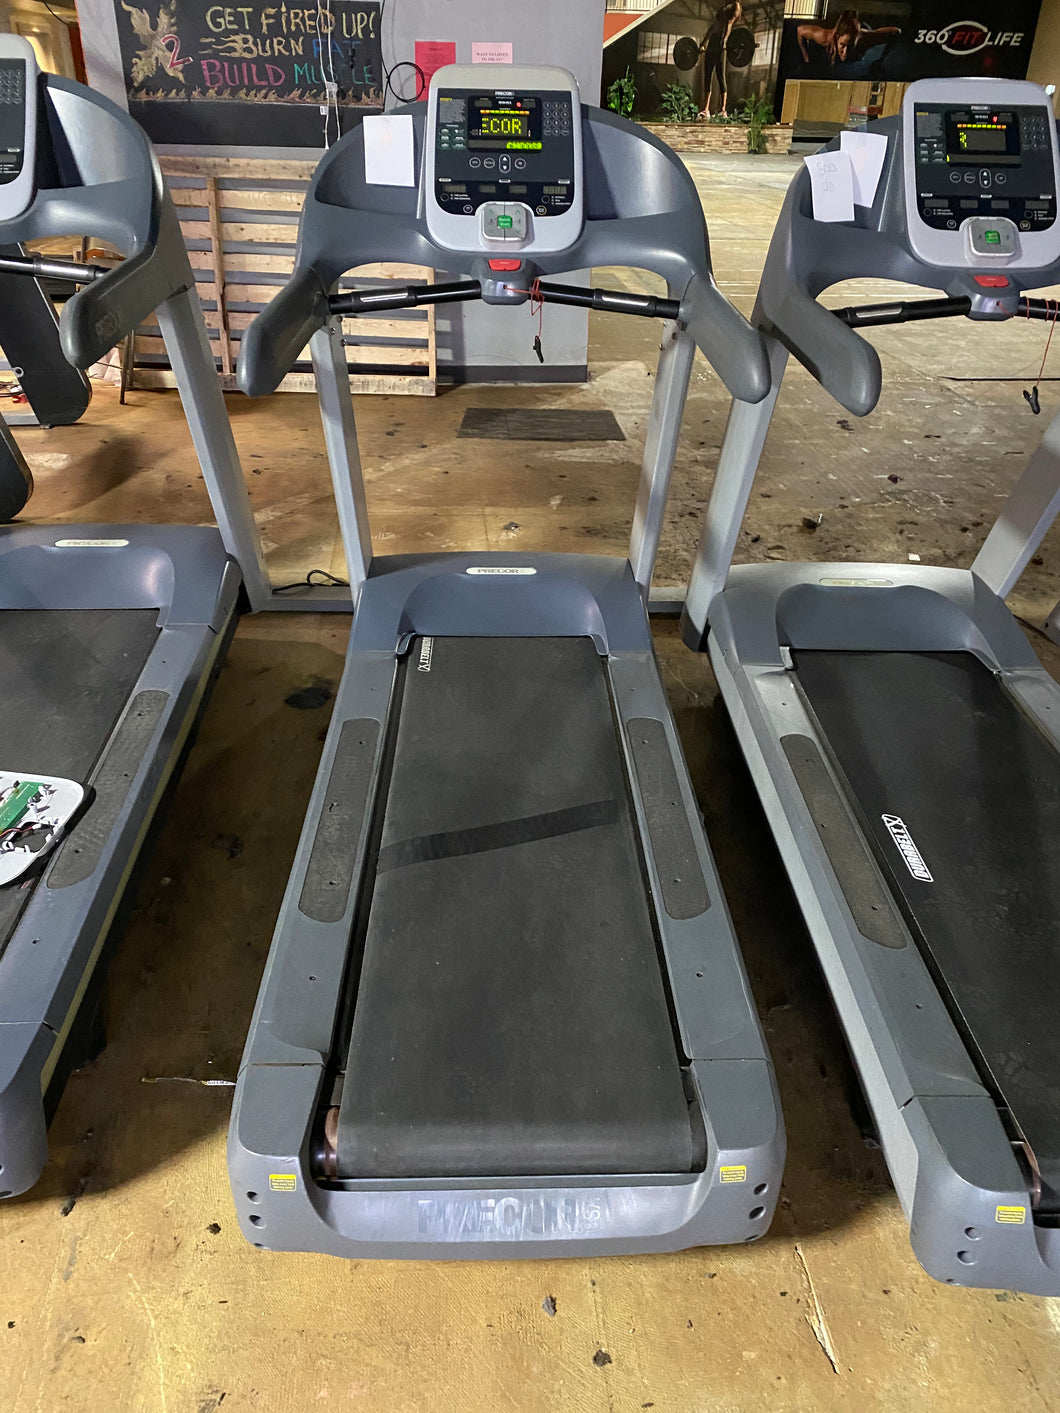 Precor 966i Commercial Treadmill - Cleaned and Serviced